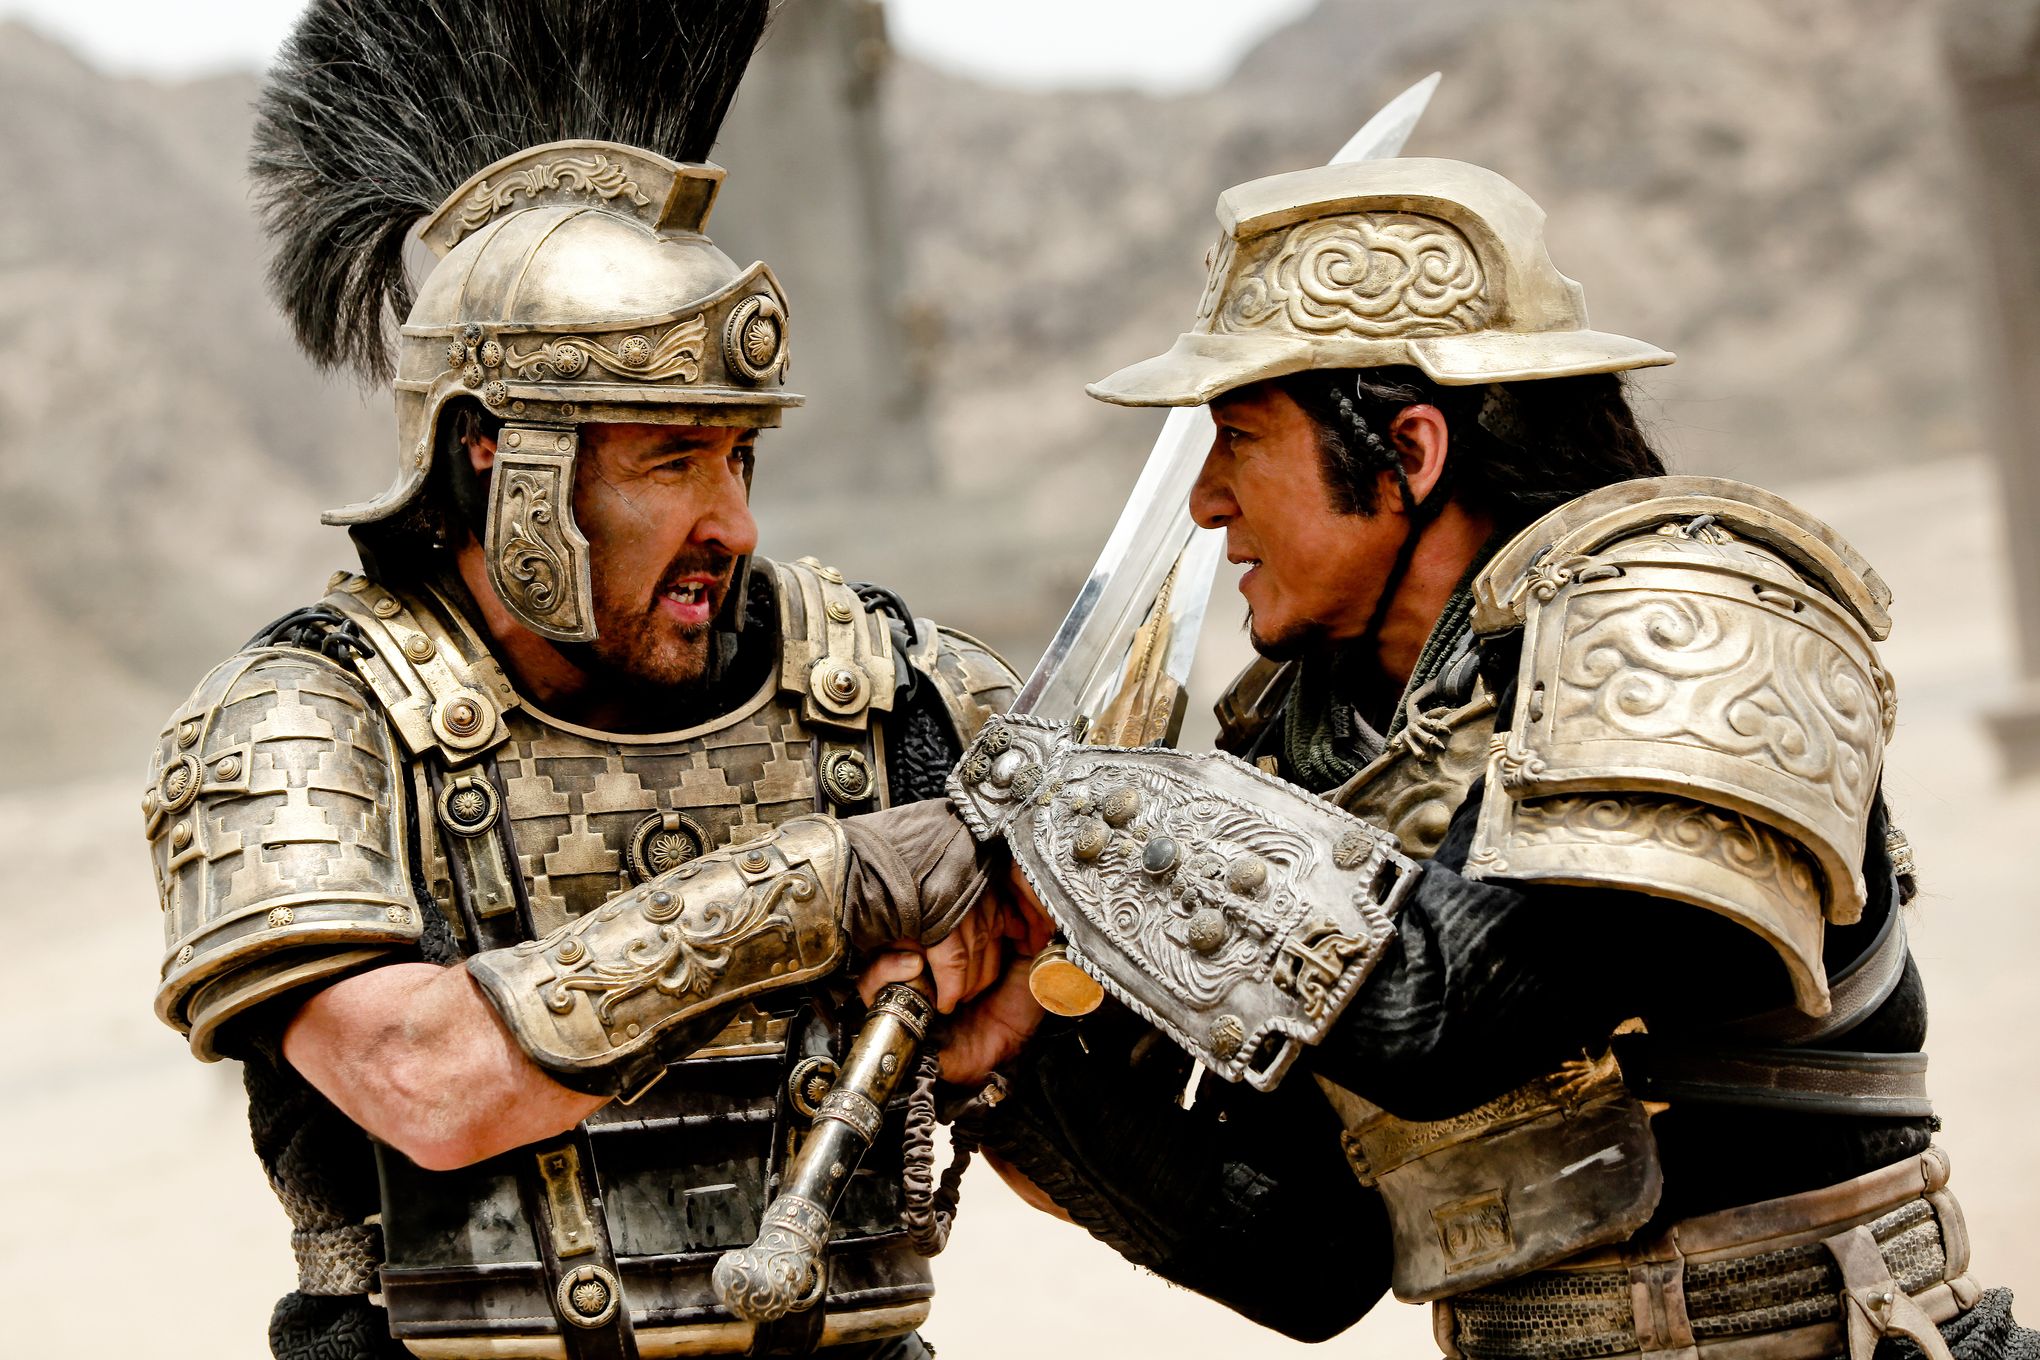 Dragon Blade': Jackie Chan leads epic action